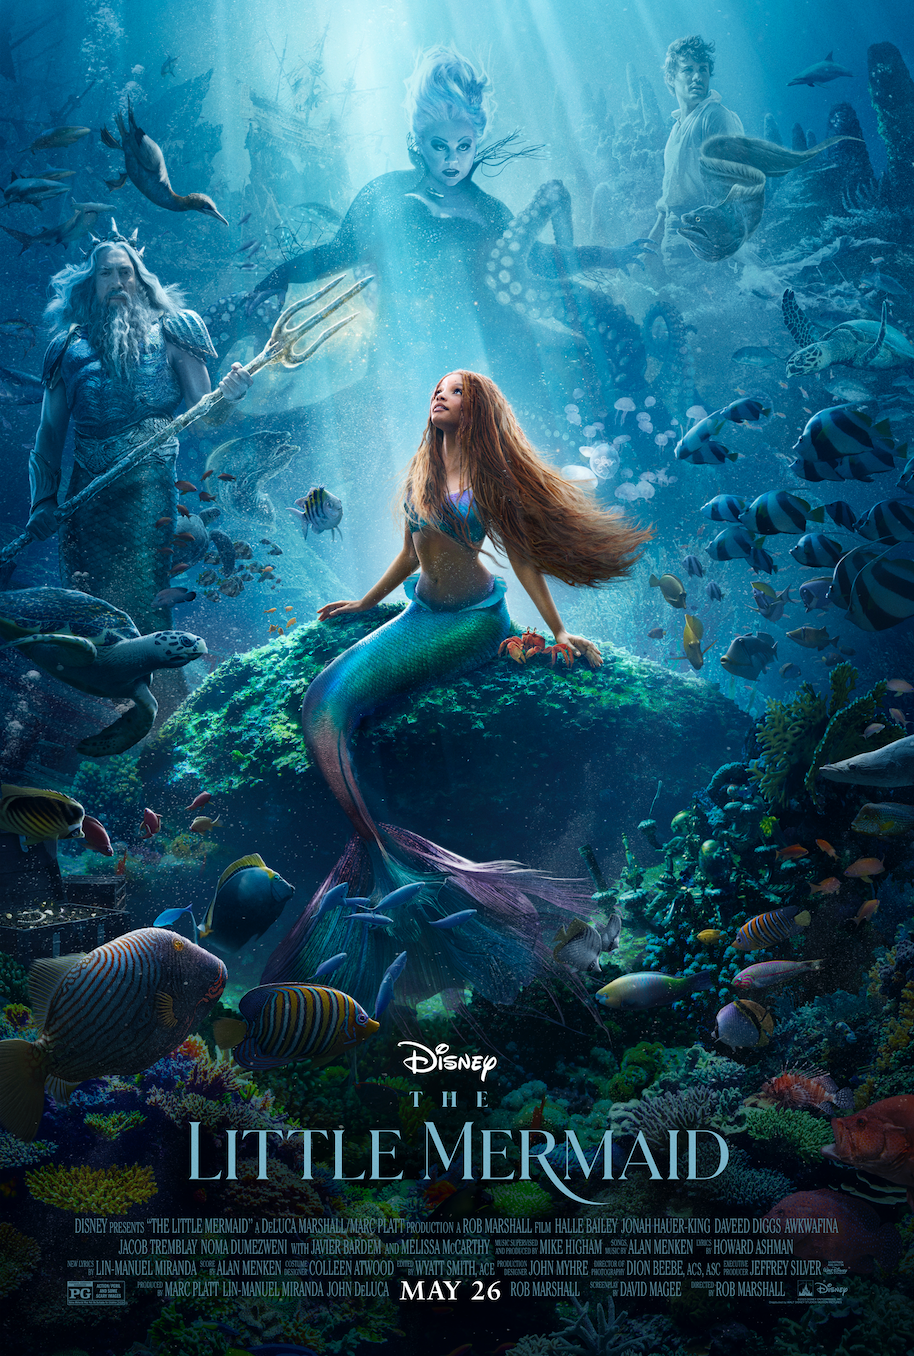 The poster for The Little Mermaid